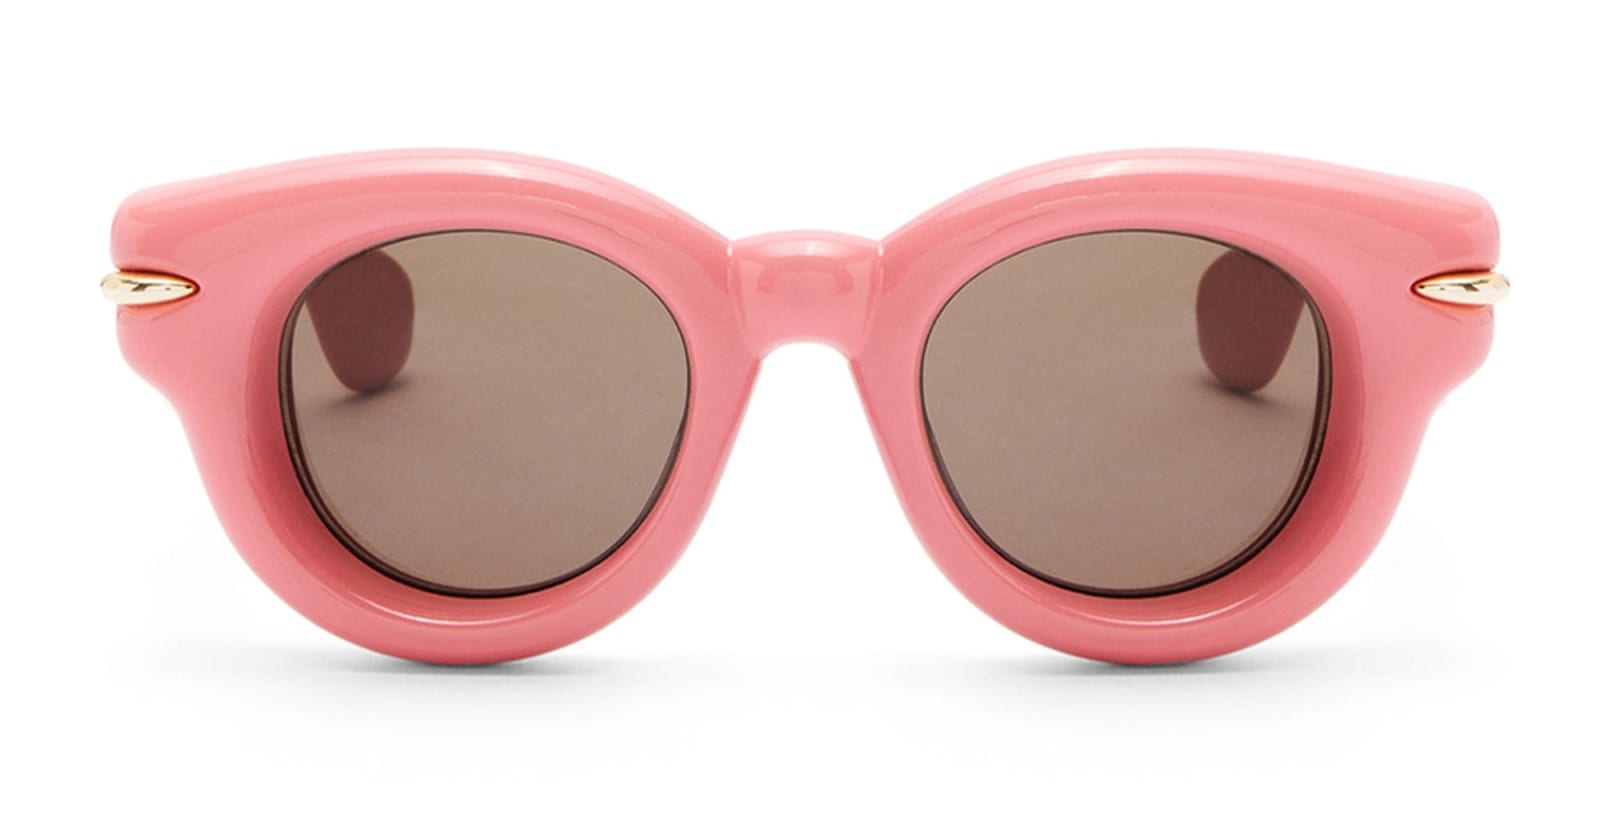 Loewe Inflated Round - Coral Pink Glasses